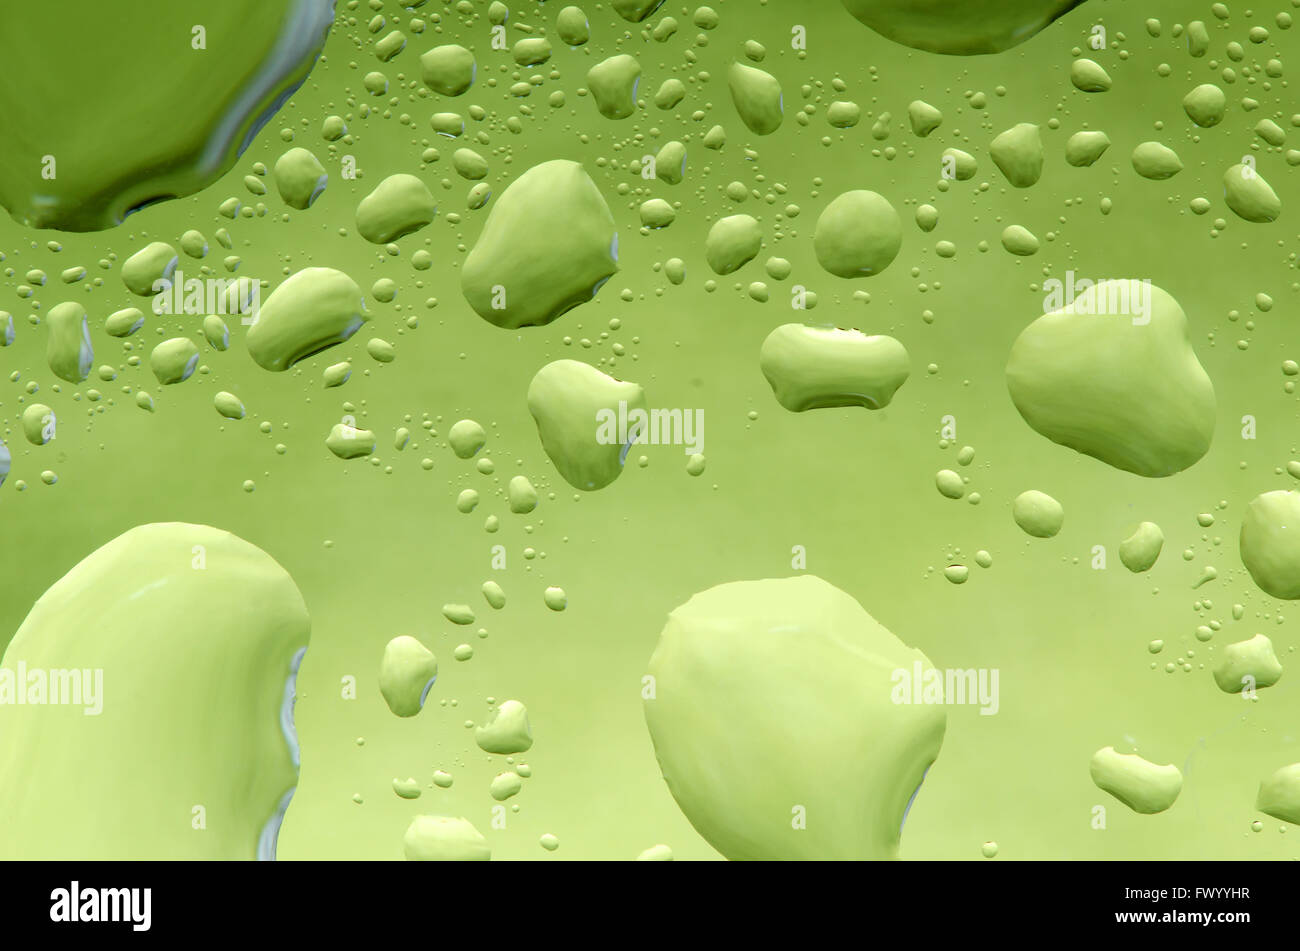 Water drops on gresh green natural background. Stock Photo